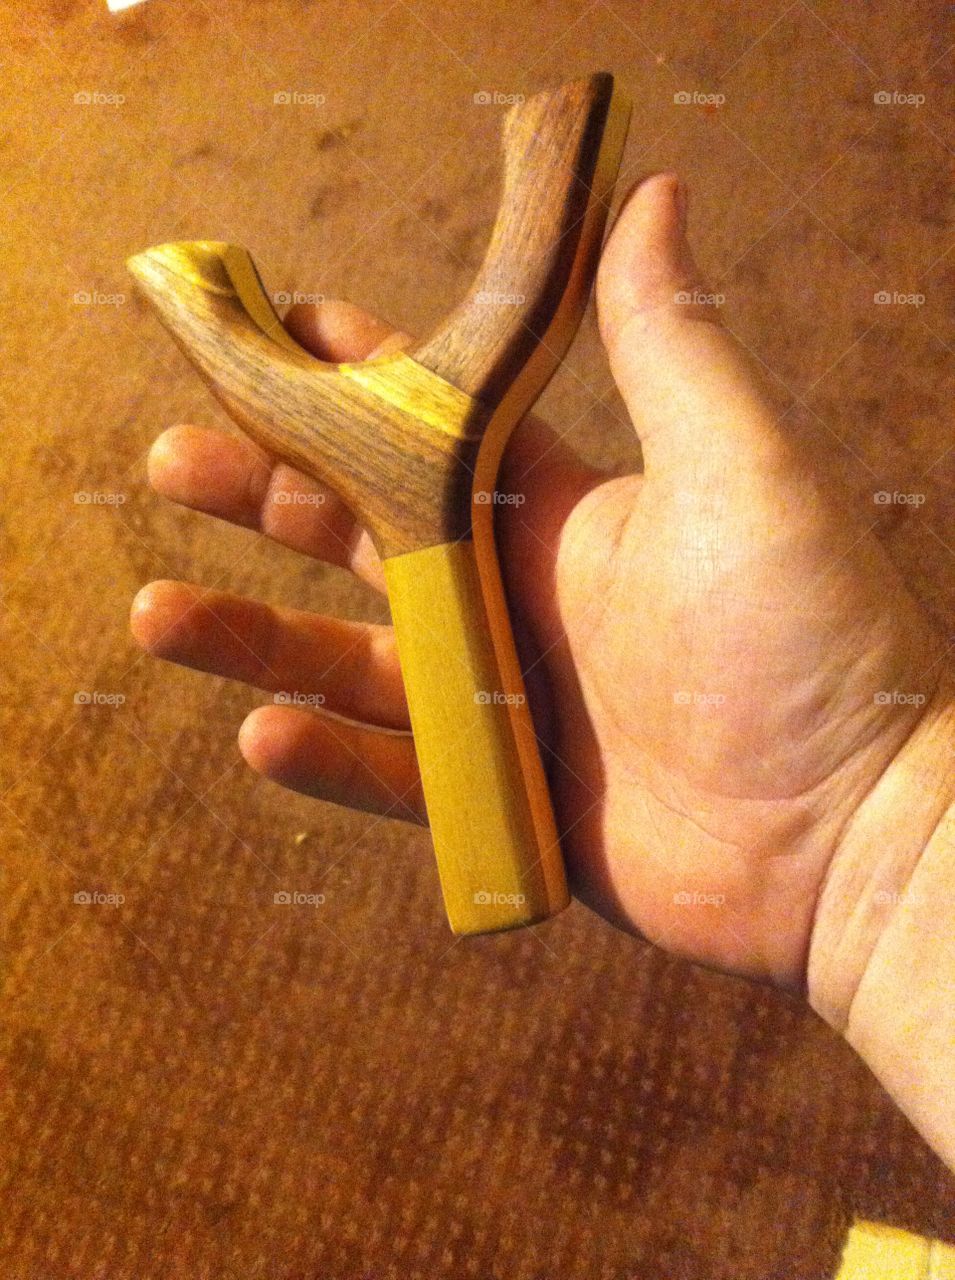 Okie Beanflips. A three wood homemade laminate hand carved sling shot I made for my son.